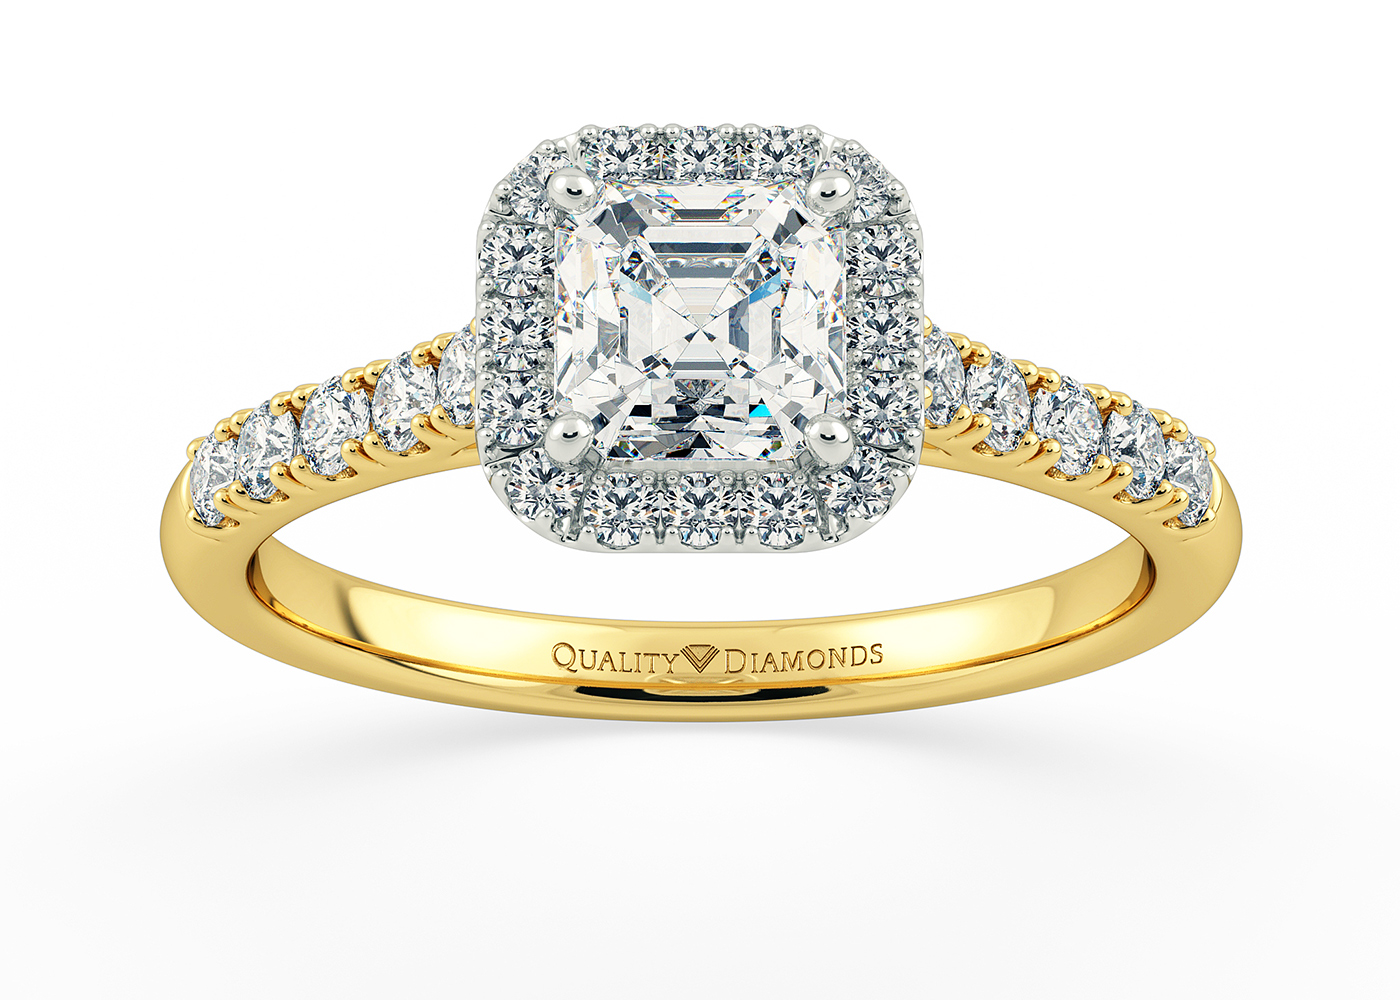 One Carat Asscher Halo Diamond Ring in 18K Yellow Gold